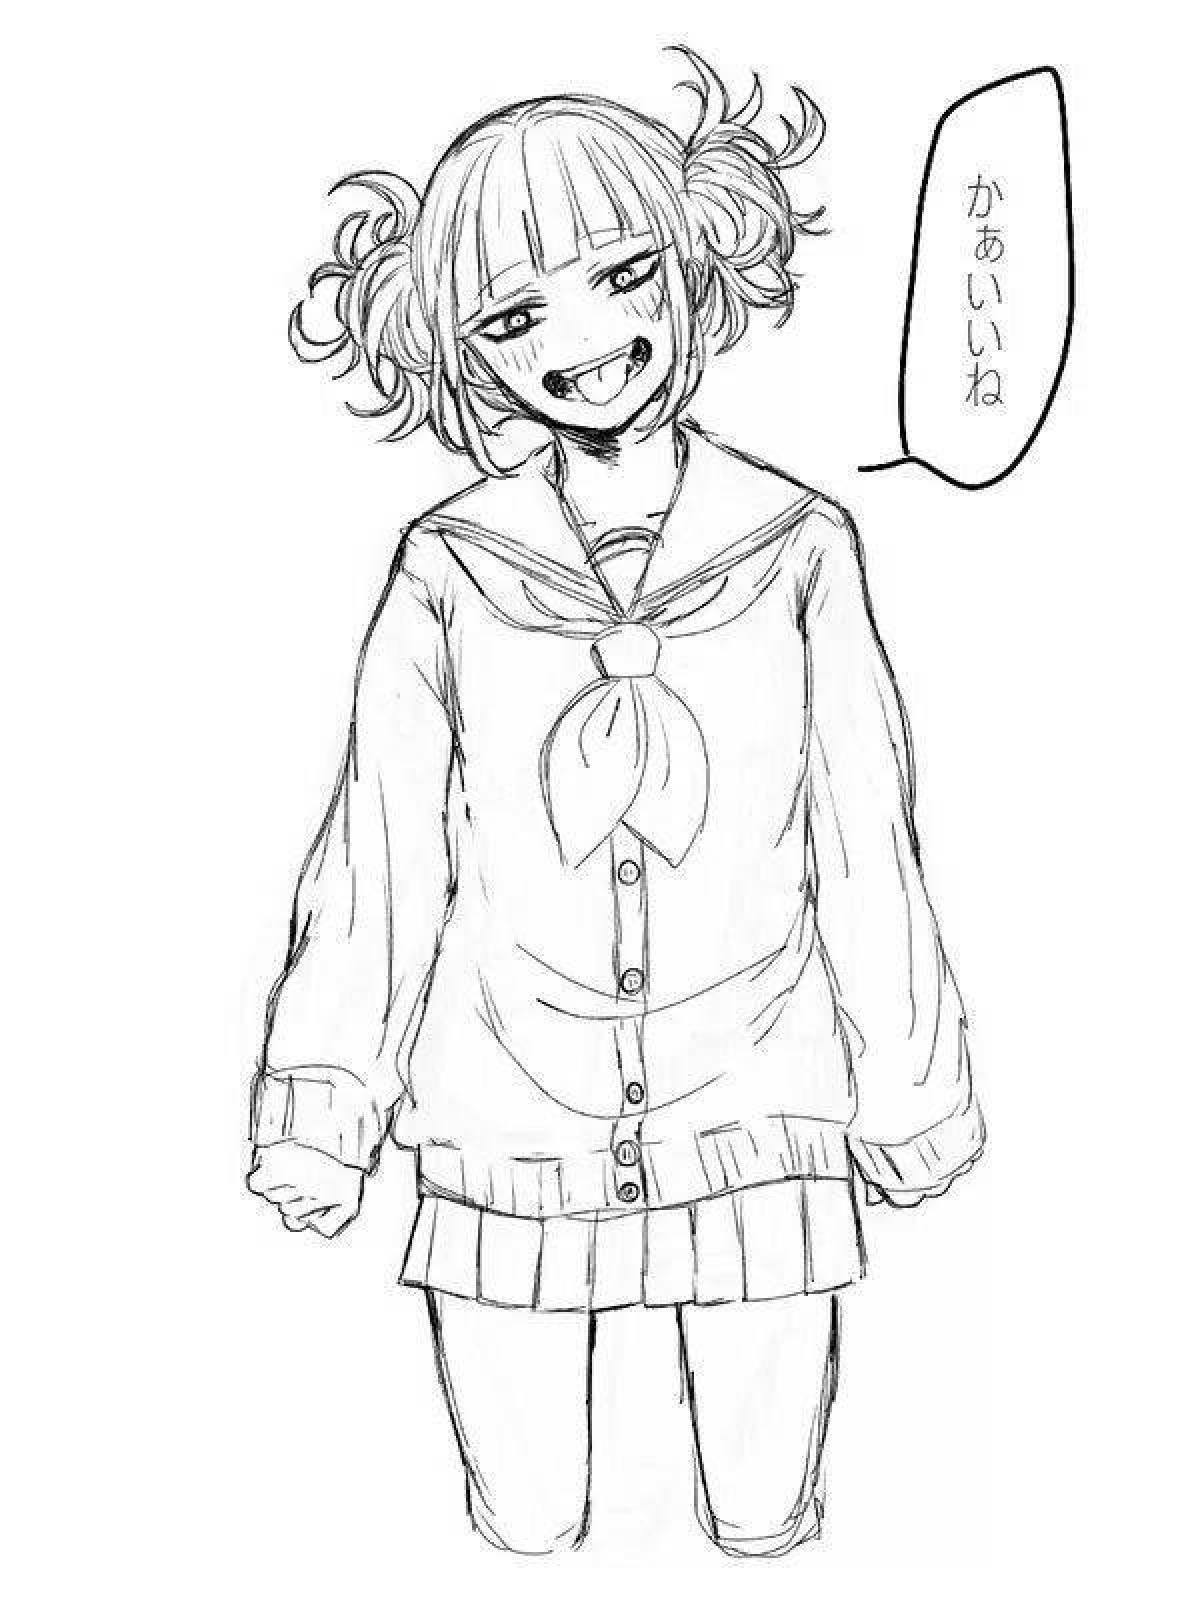 Colorful toga himiko coloring page